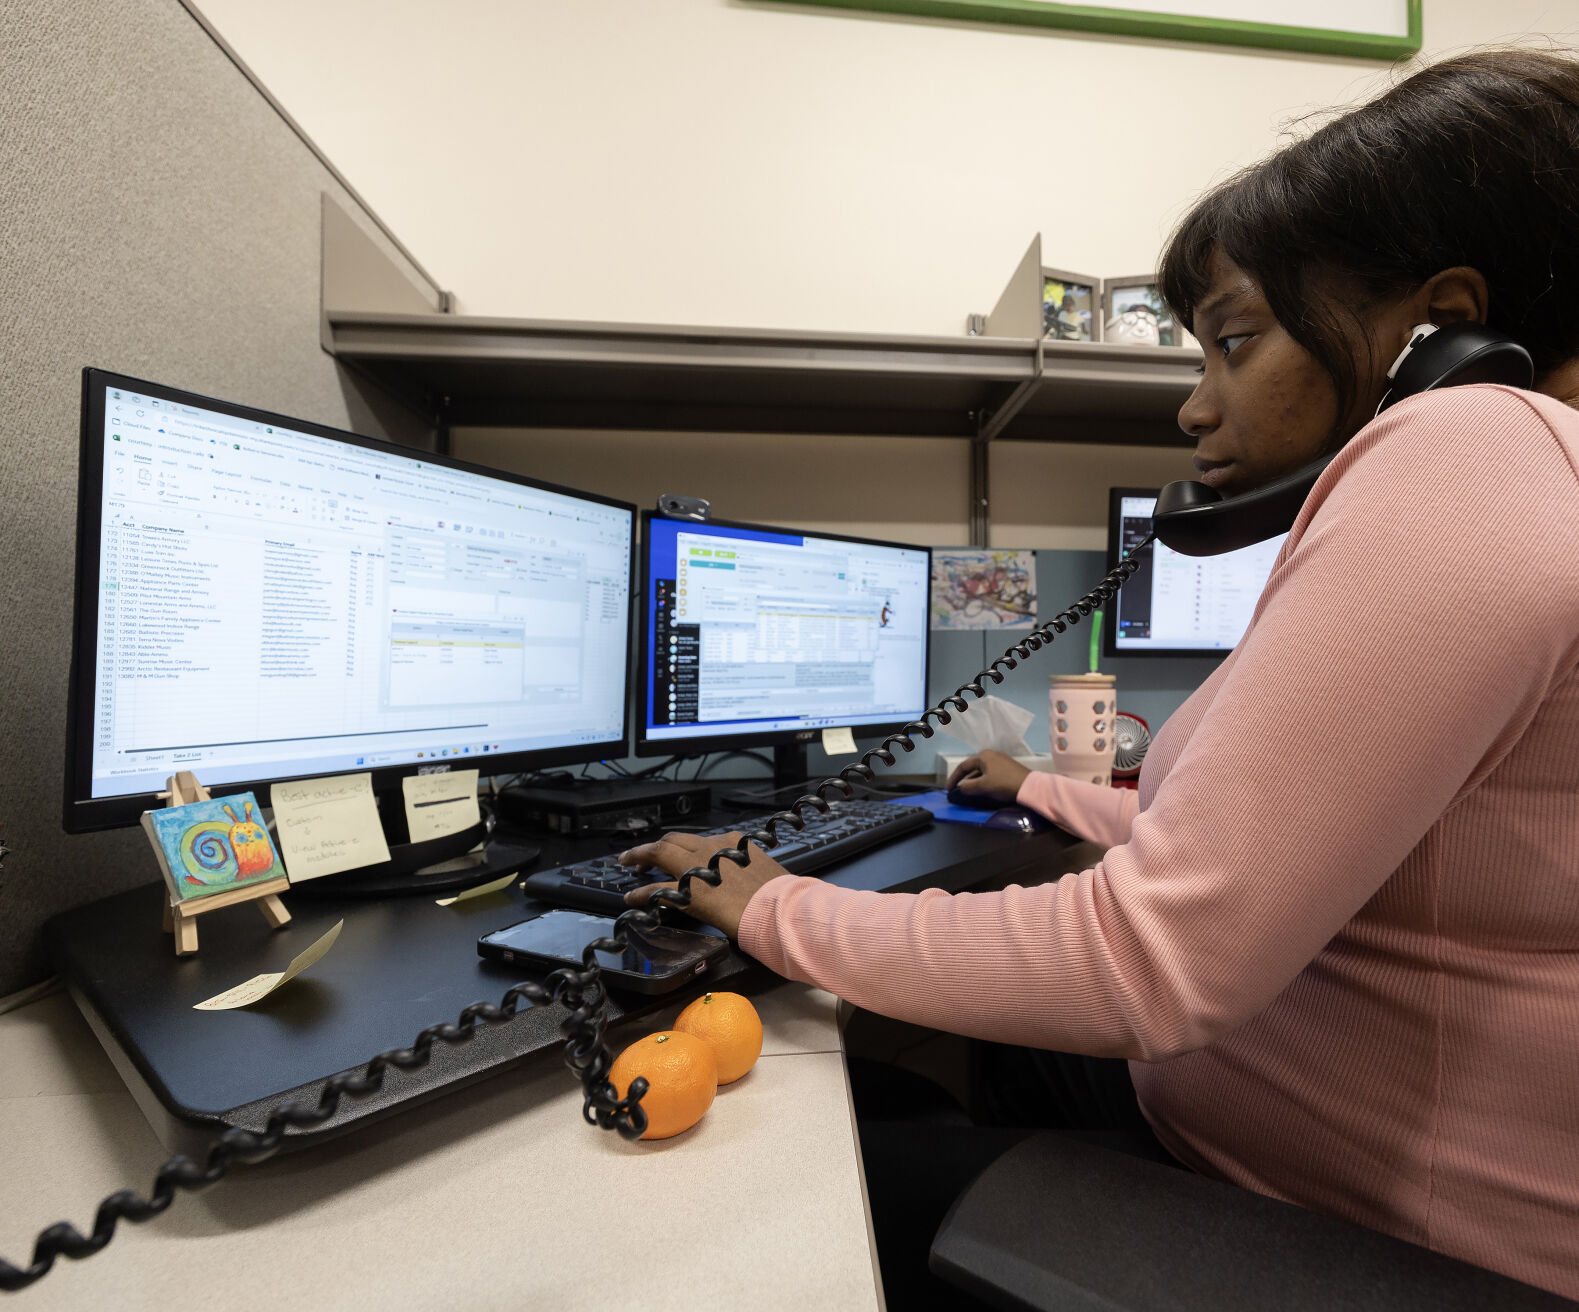 Sales support associate Roynicka Evans works at her computer at Tri-Tech in Dubuque.    PHOTO CREDIT: Stephen Gassman
Telegraph Herald